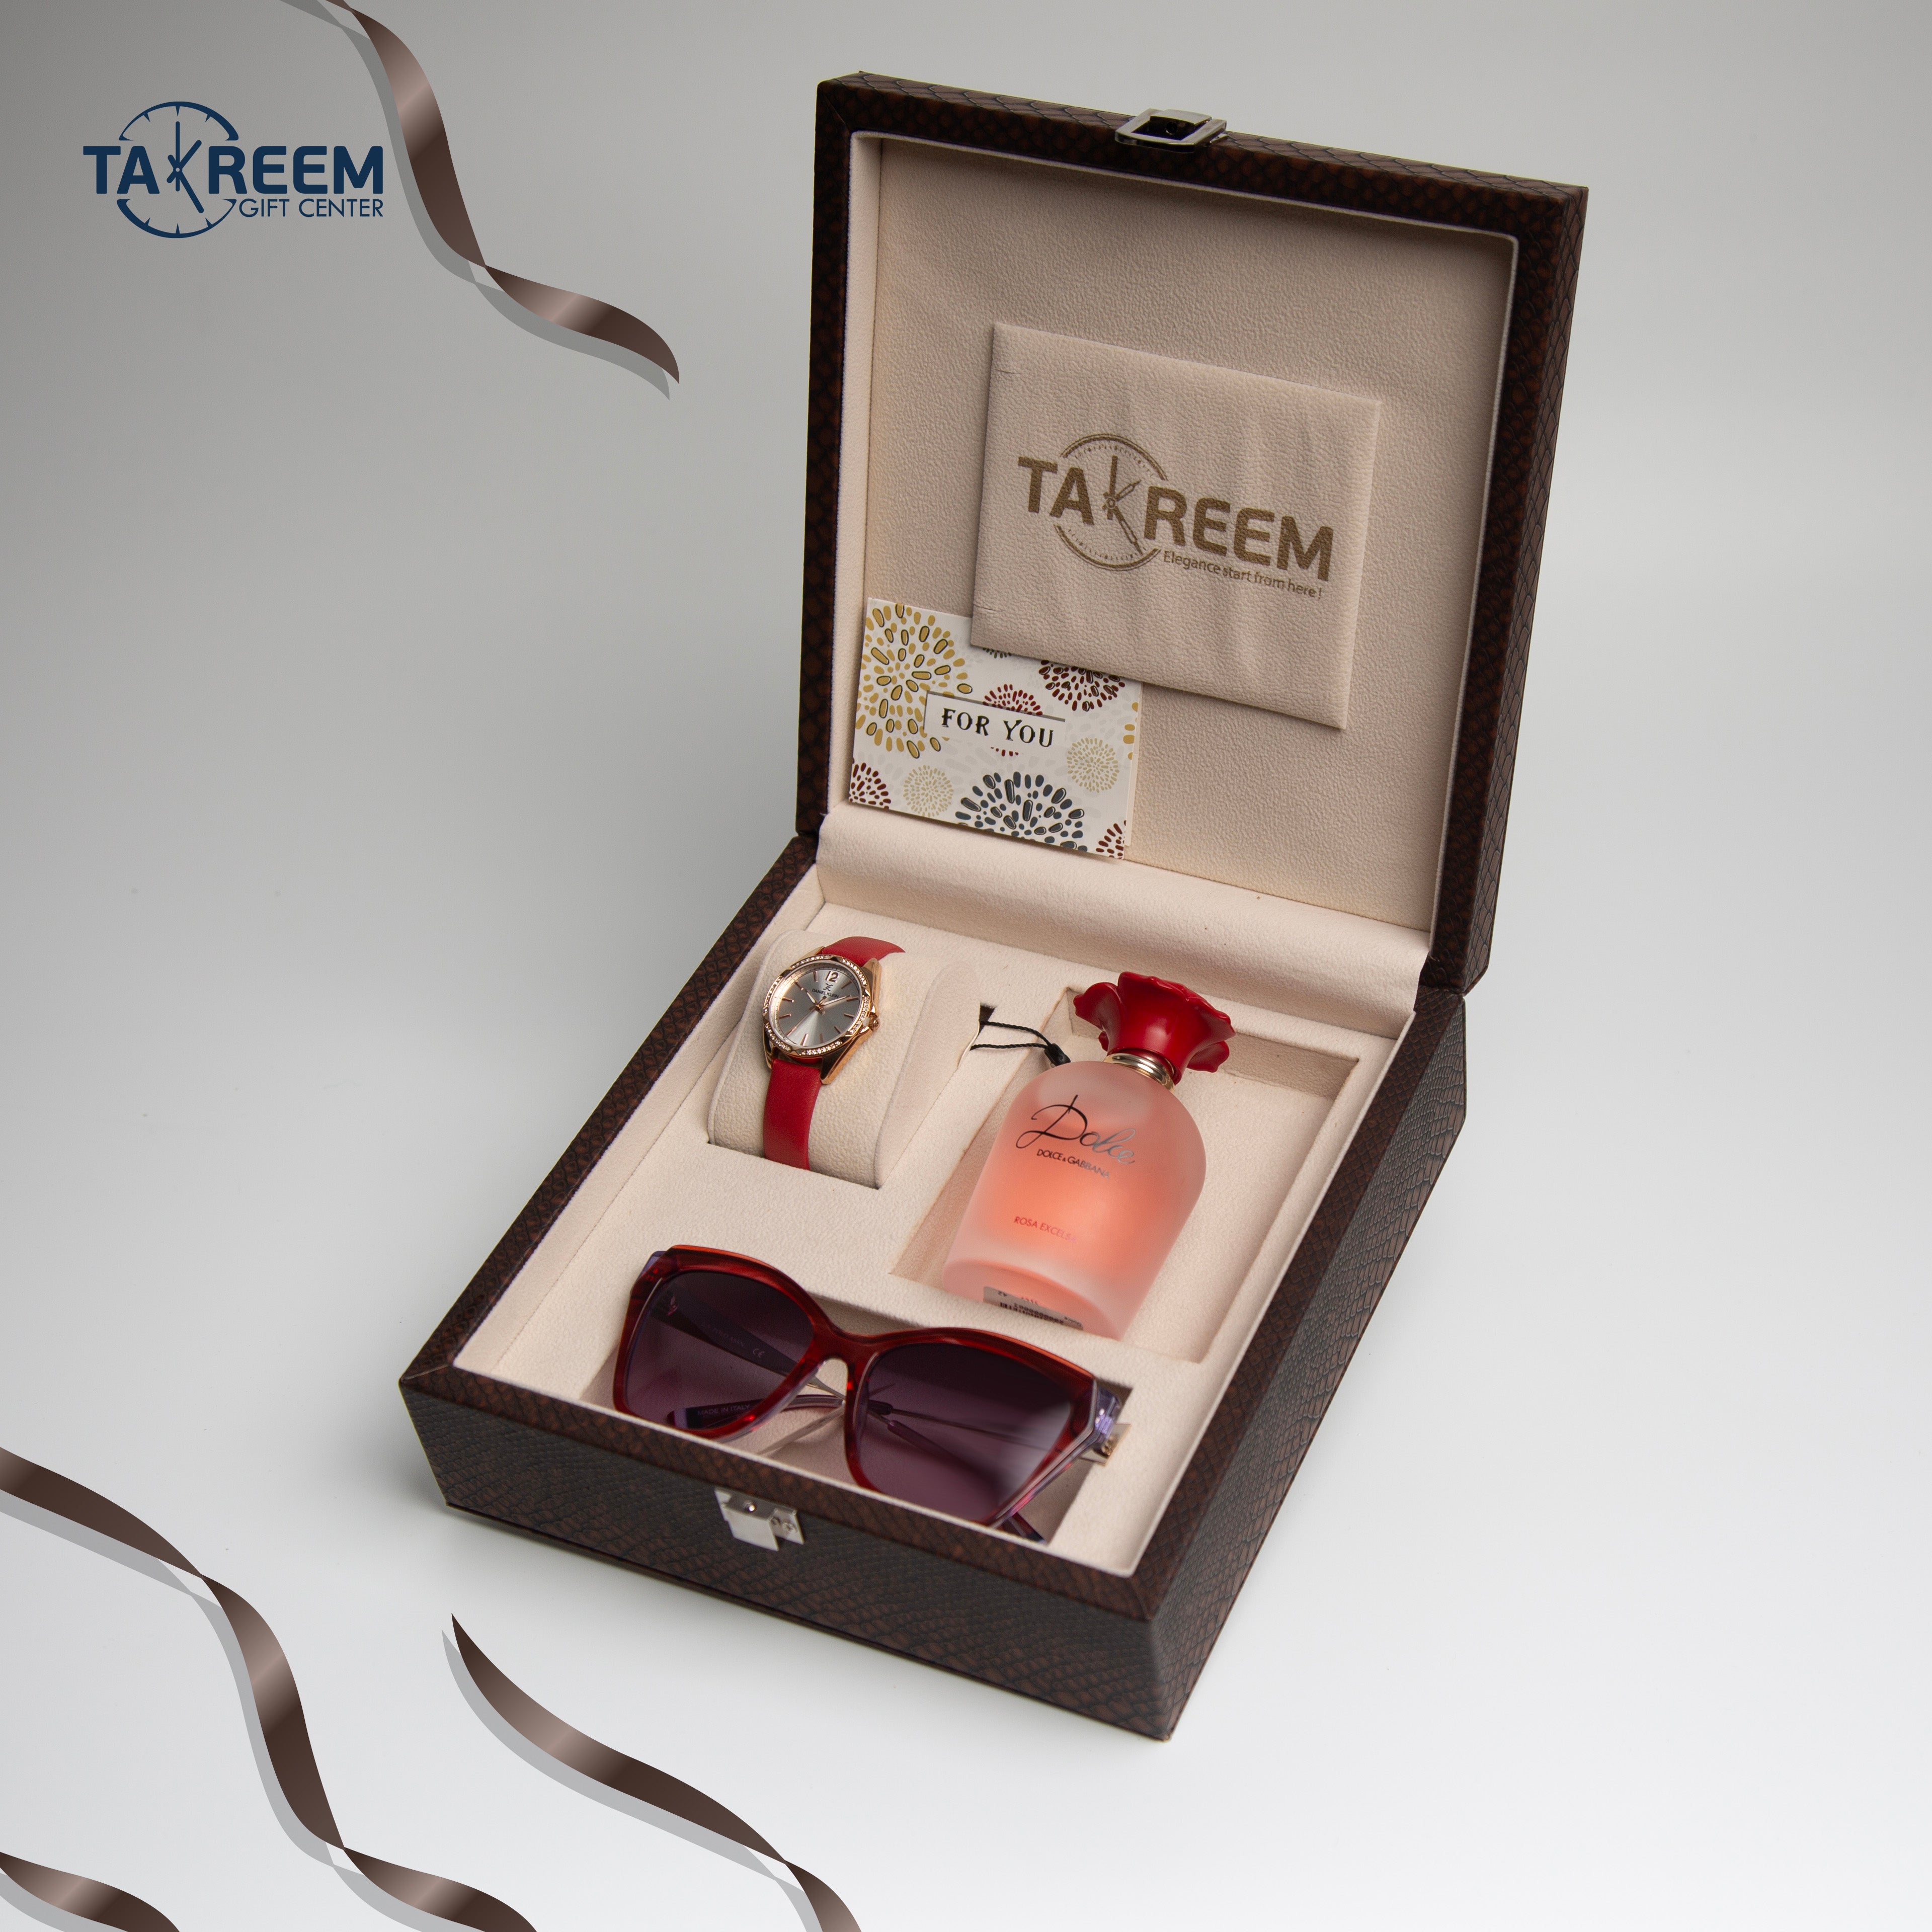  Gift Boxes By Takreem Gifts Center